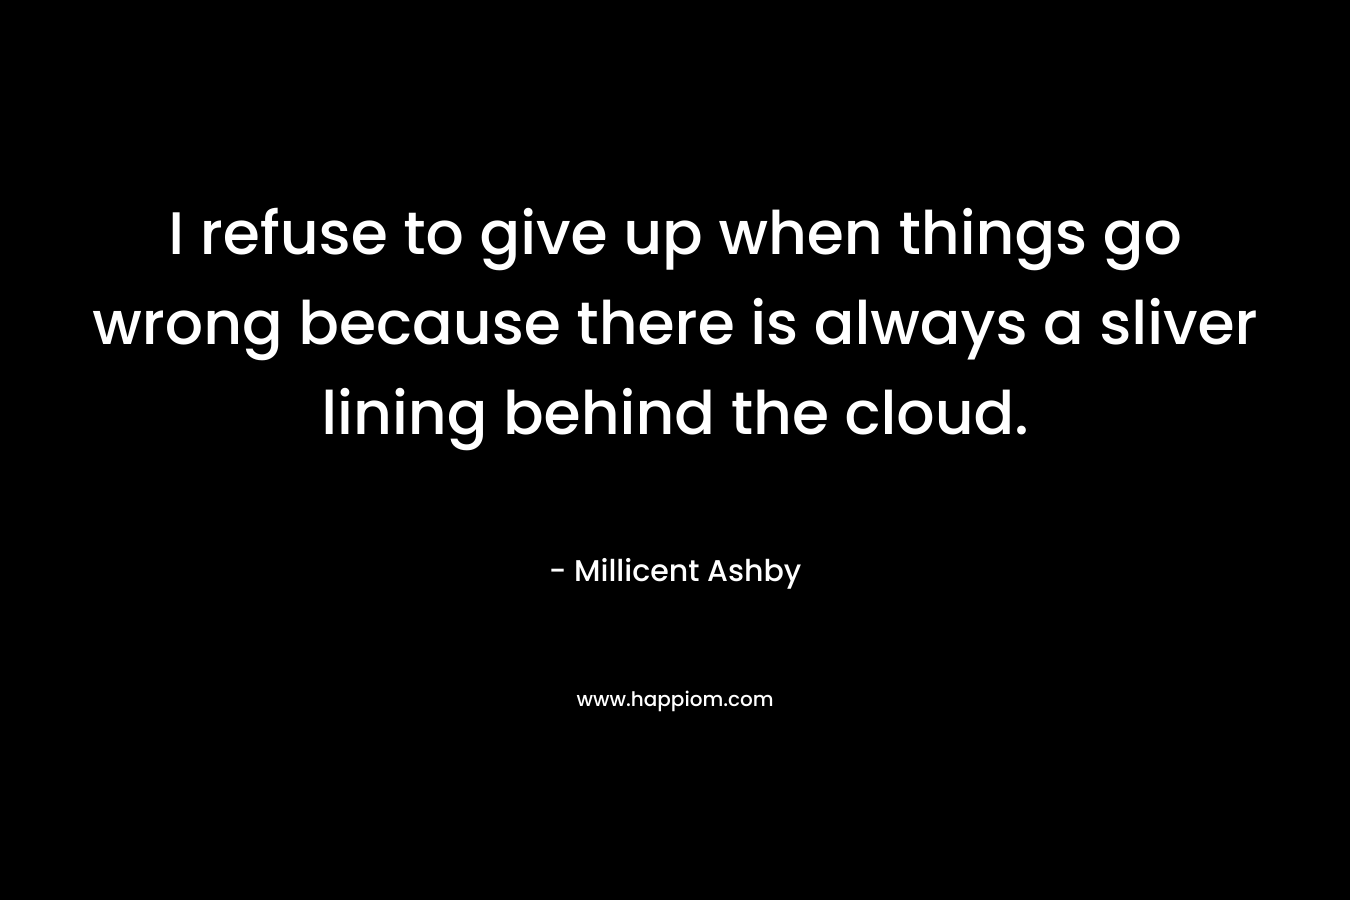 I refuse to give up when things go wrong because there is always a sliver lining behind the cloud. – Millicent Ashby